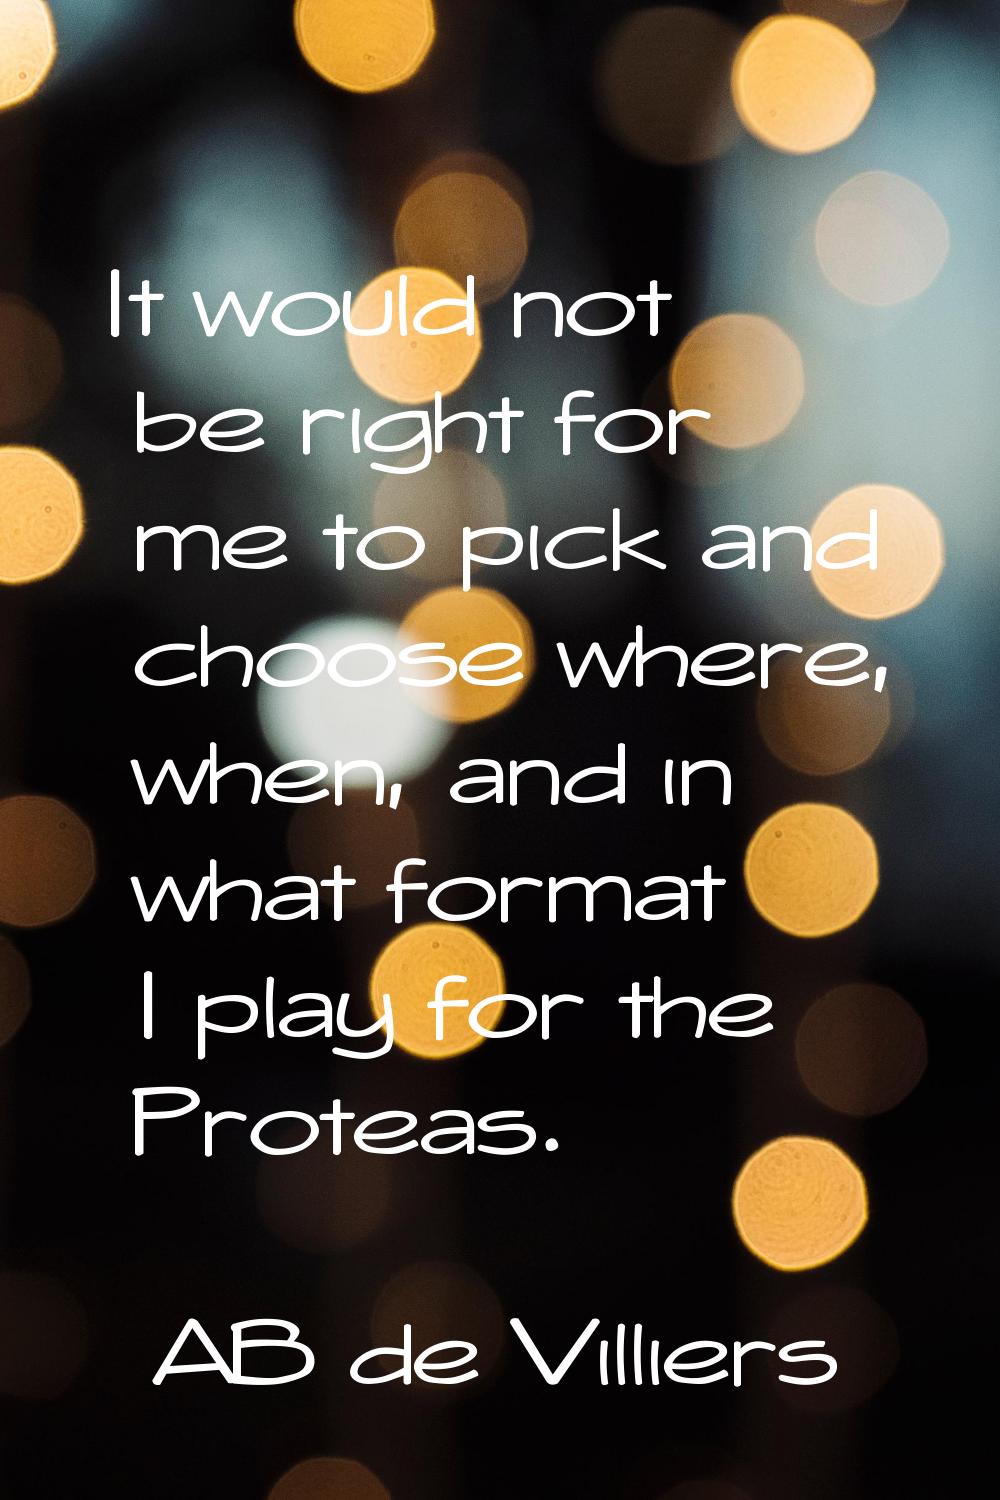 It would not be right for me to pick and choose where, when, and in what format I play for the Prot